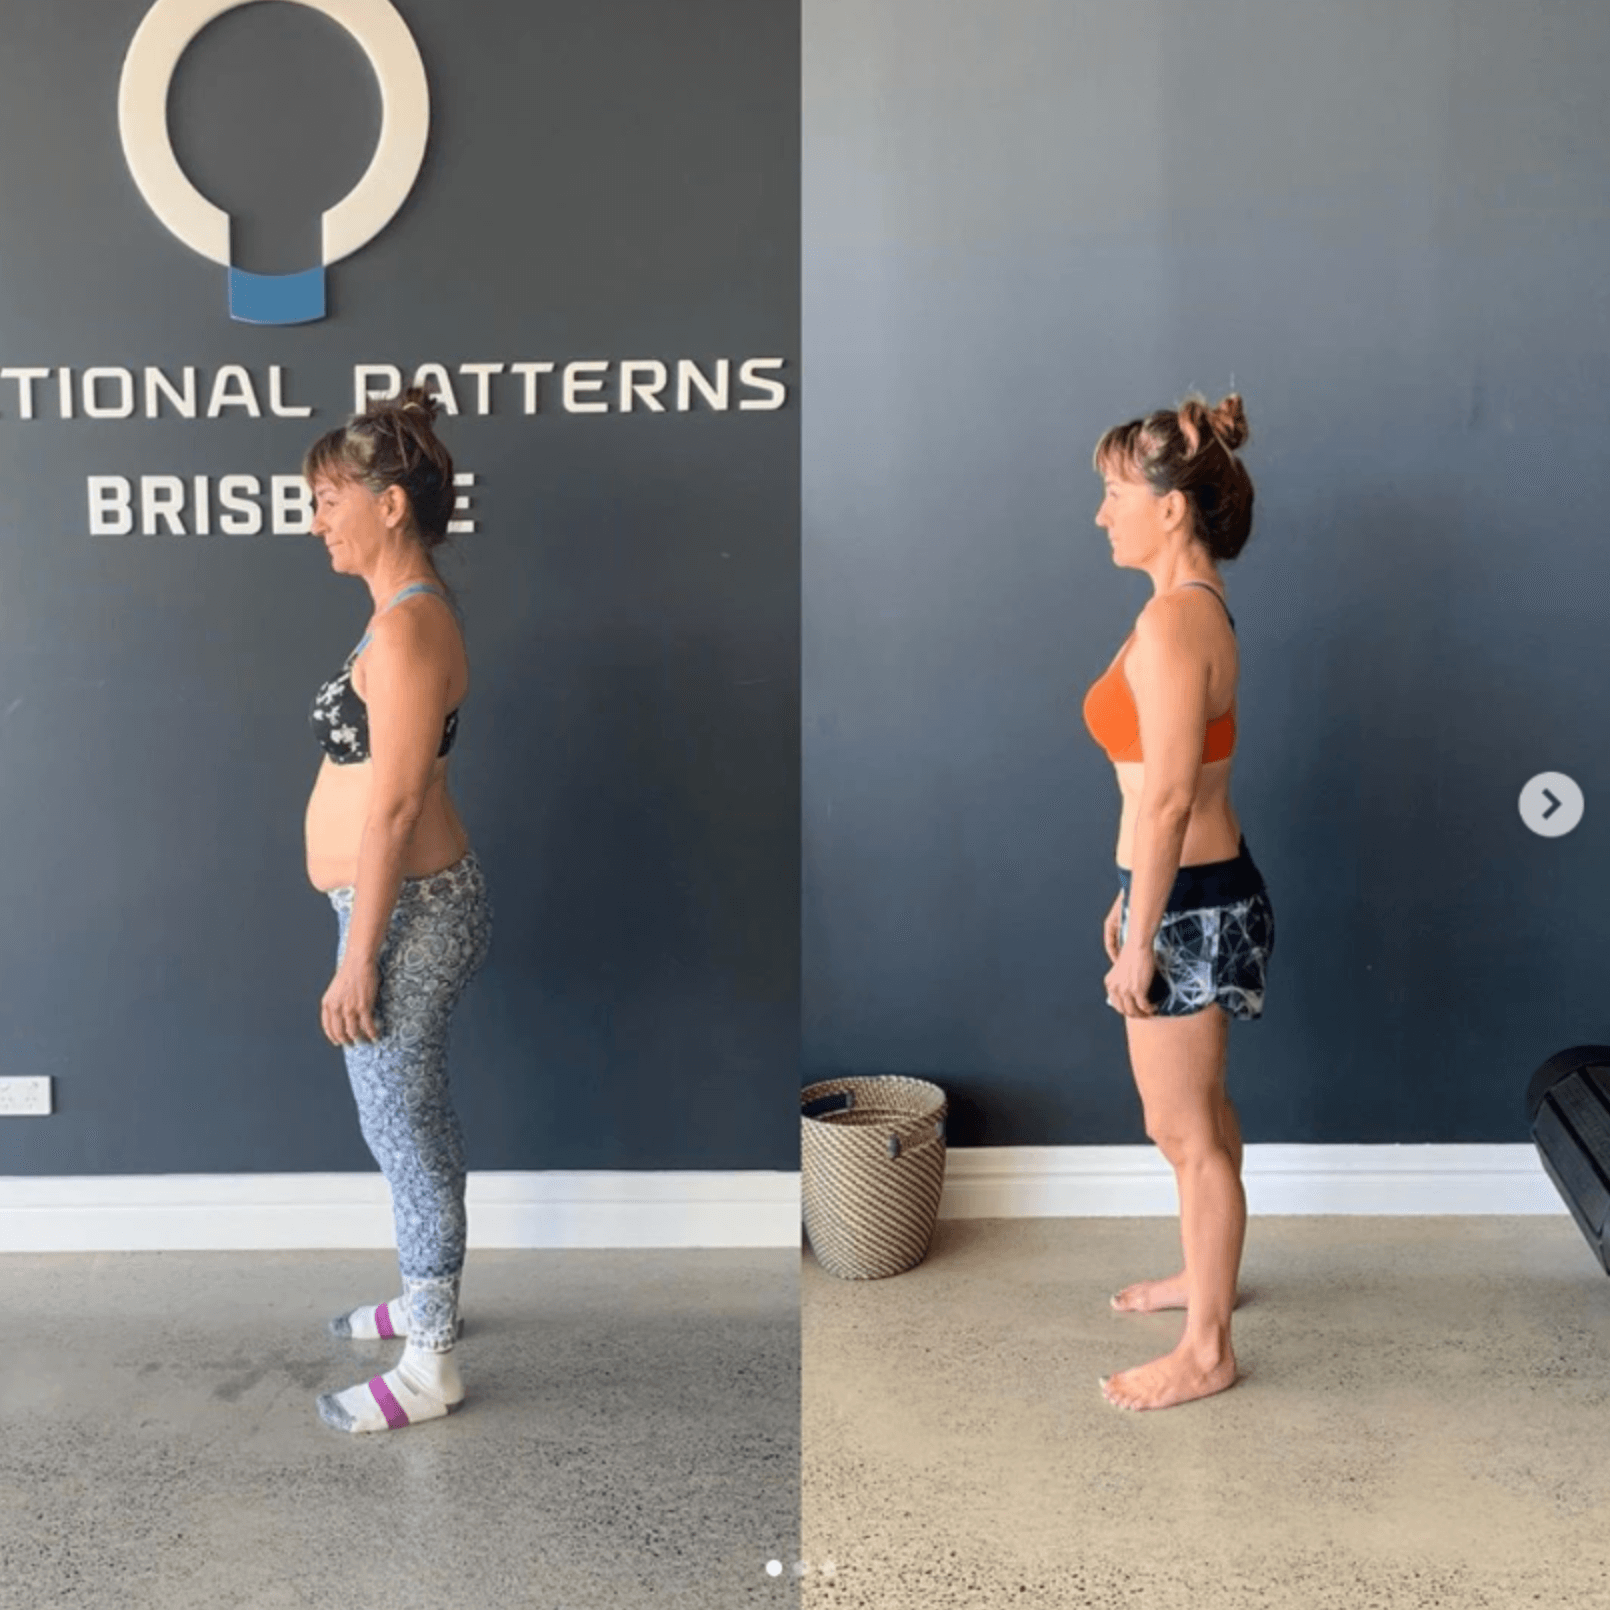 Pain, Posture & Performance Gains – Functional Patterns